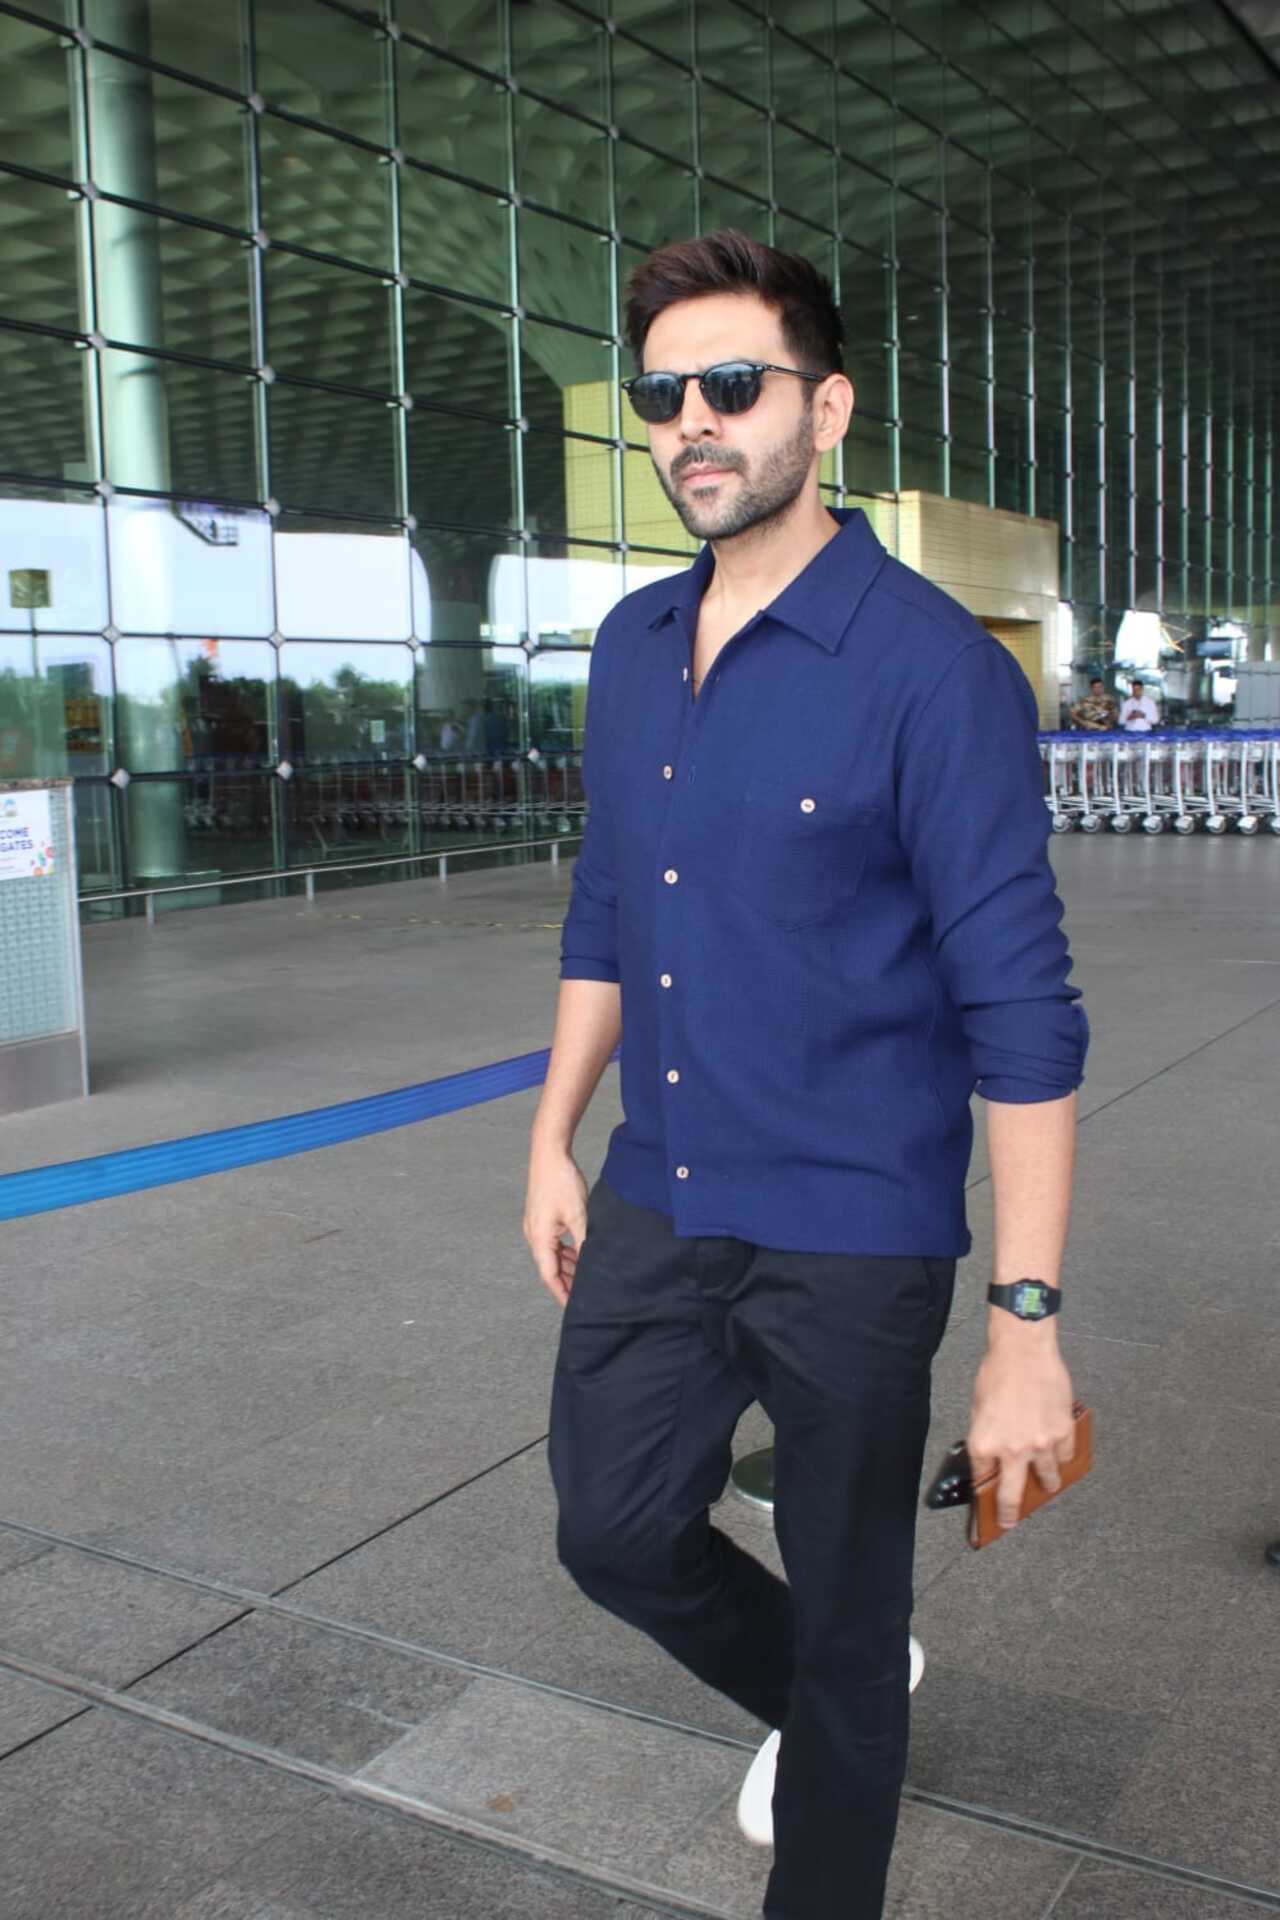 Kartik Aaryan was seen at the Mumbai airport today. He opted for a blue shirt and black pants. The actor sported a sharp look as he is busy shooting for Chandu Champion